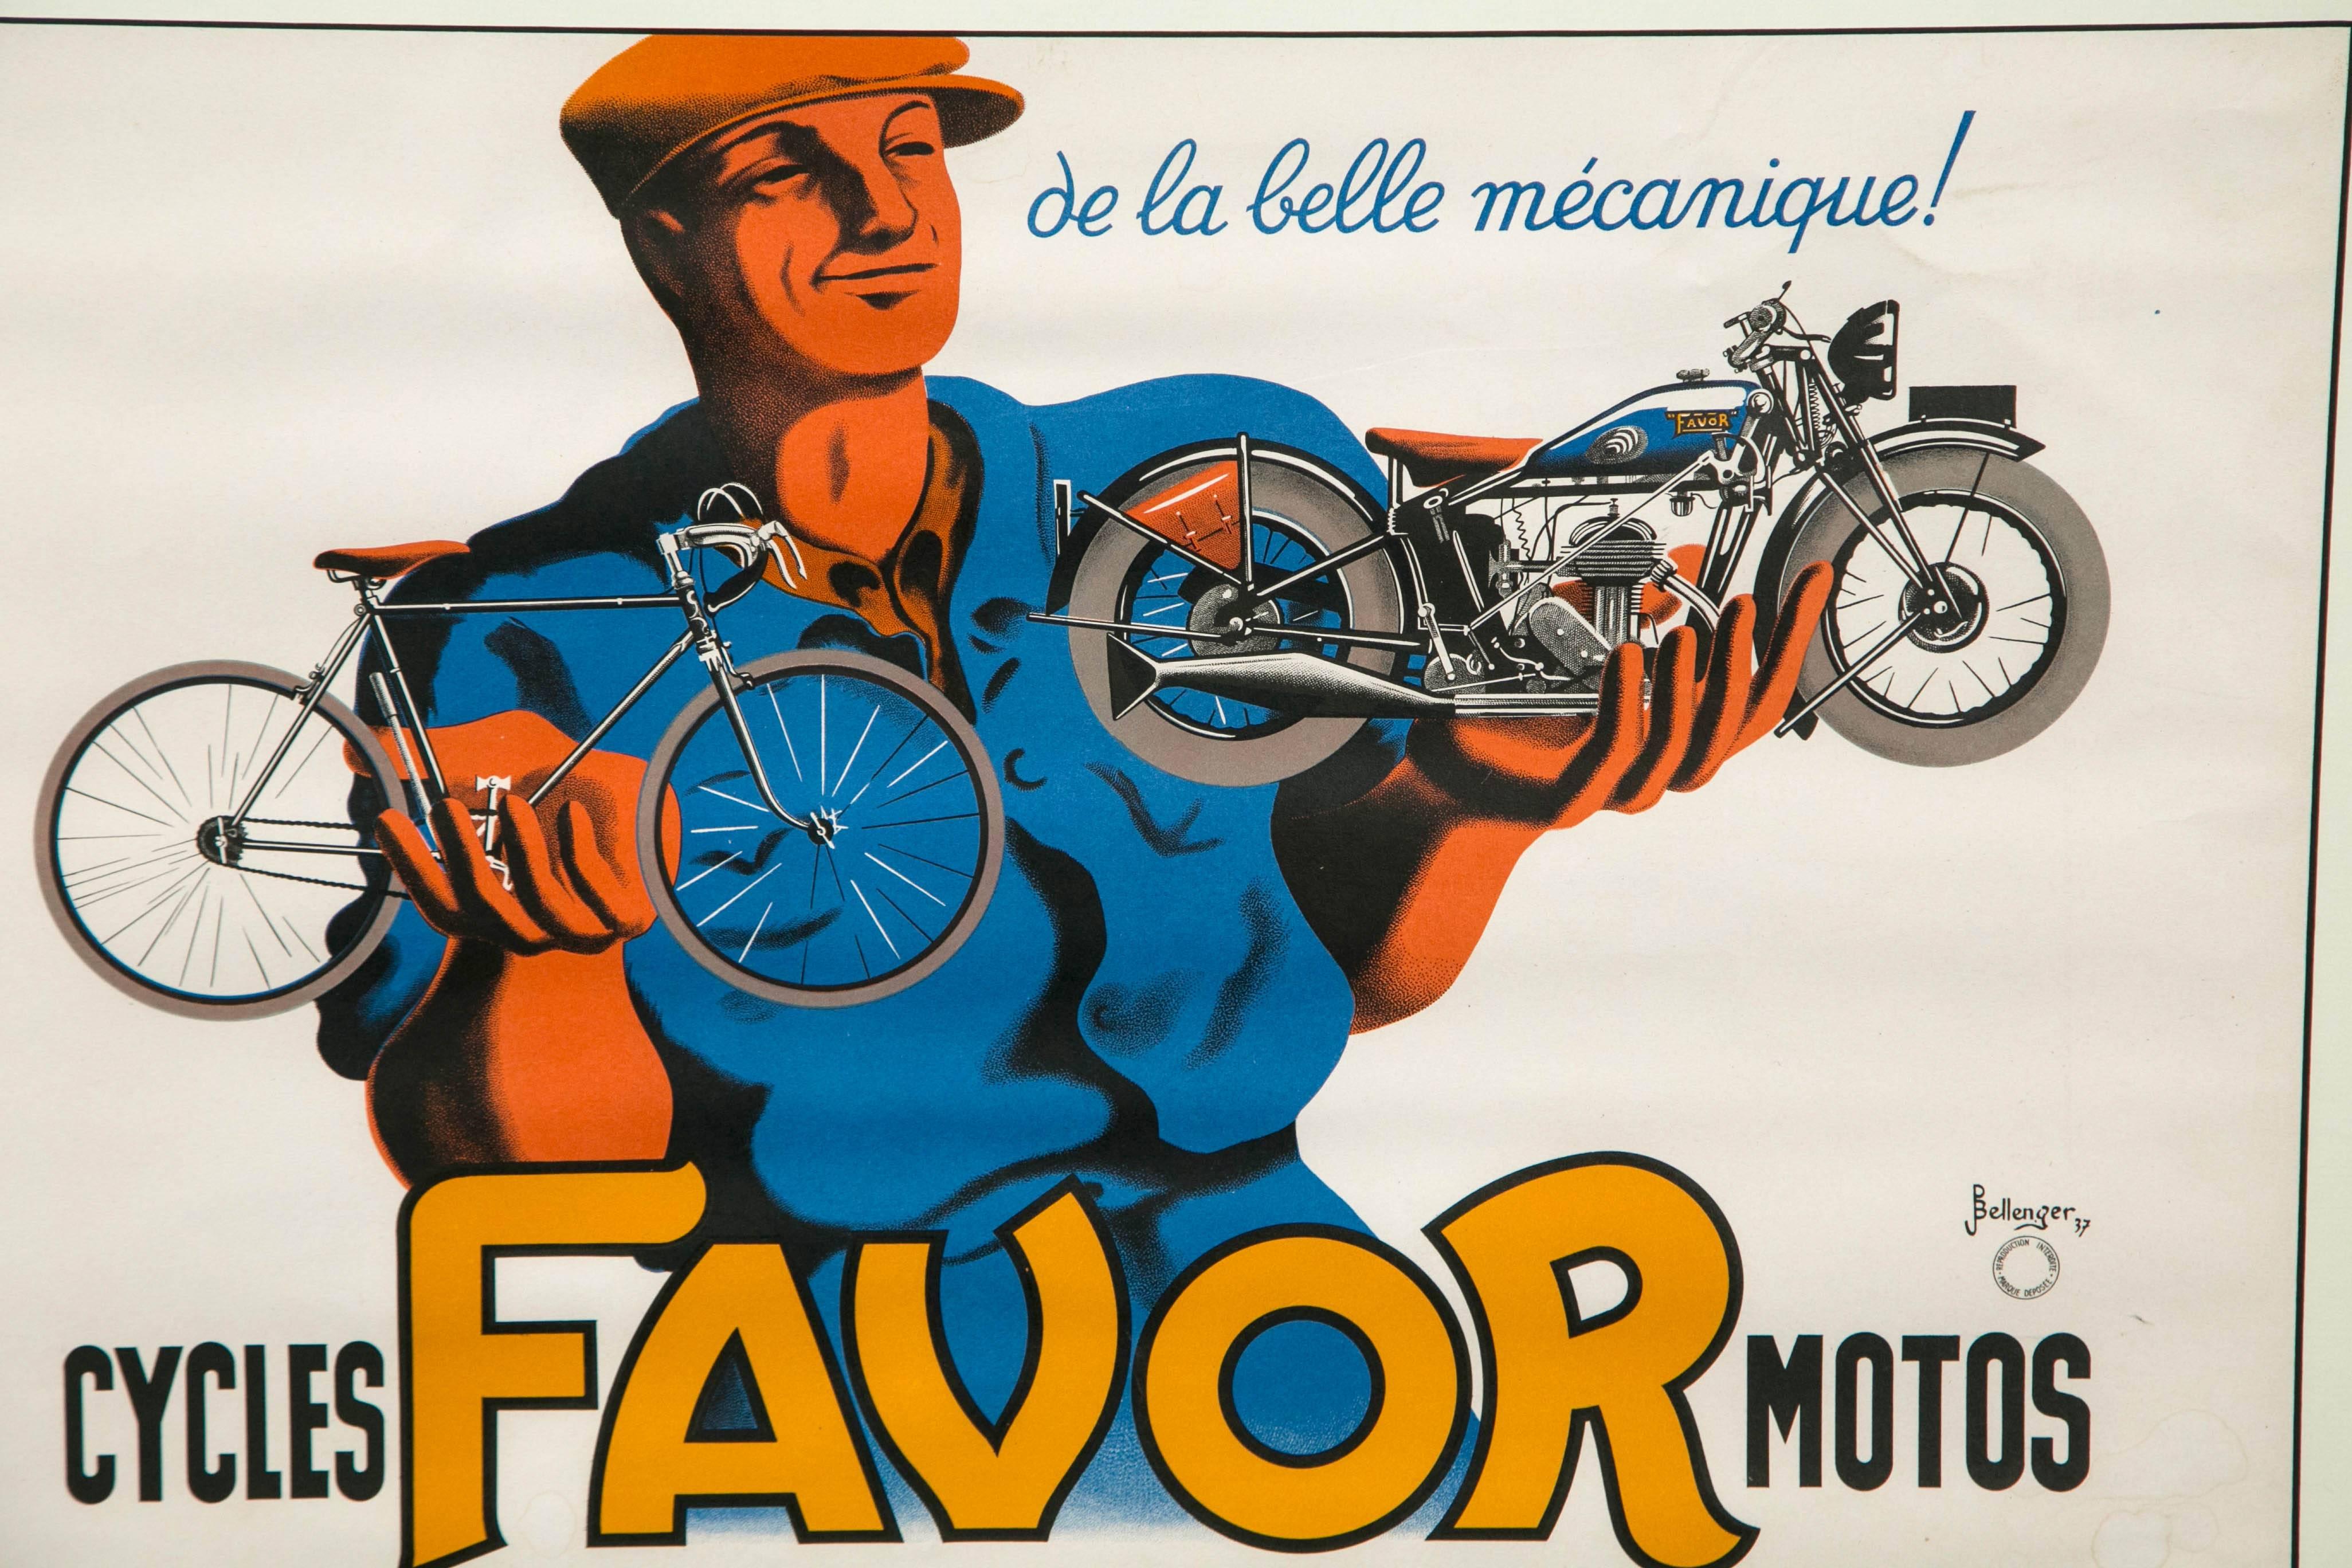 Original motorcycle advertising poster for the French company, Favor by Bellenger dated 1937. Newly framed and matted. Retaining its original vibrant colors and details.